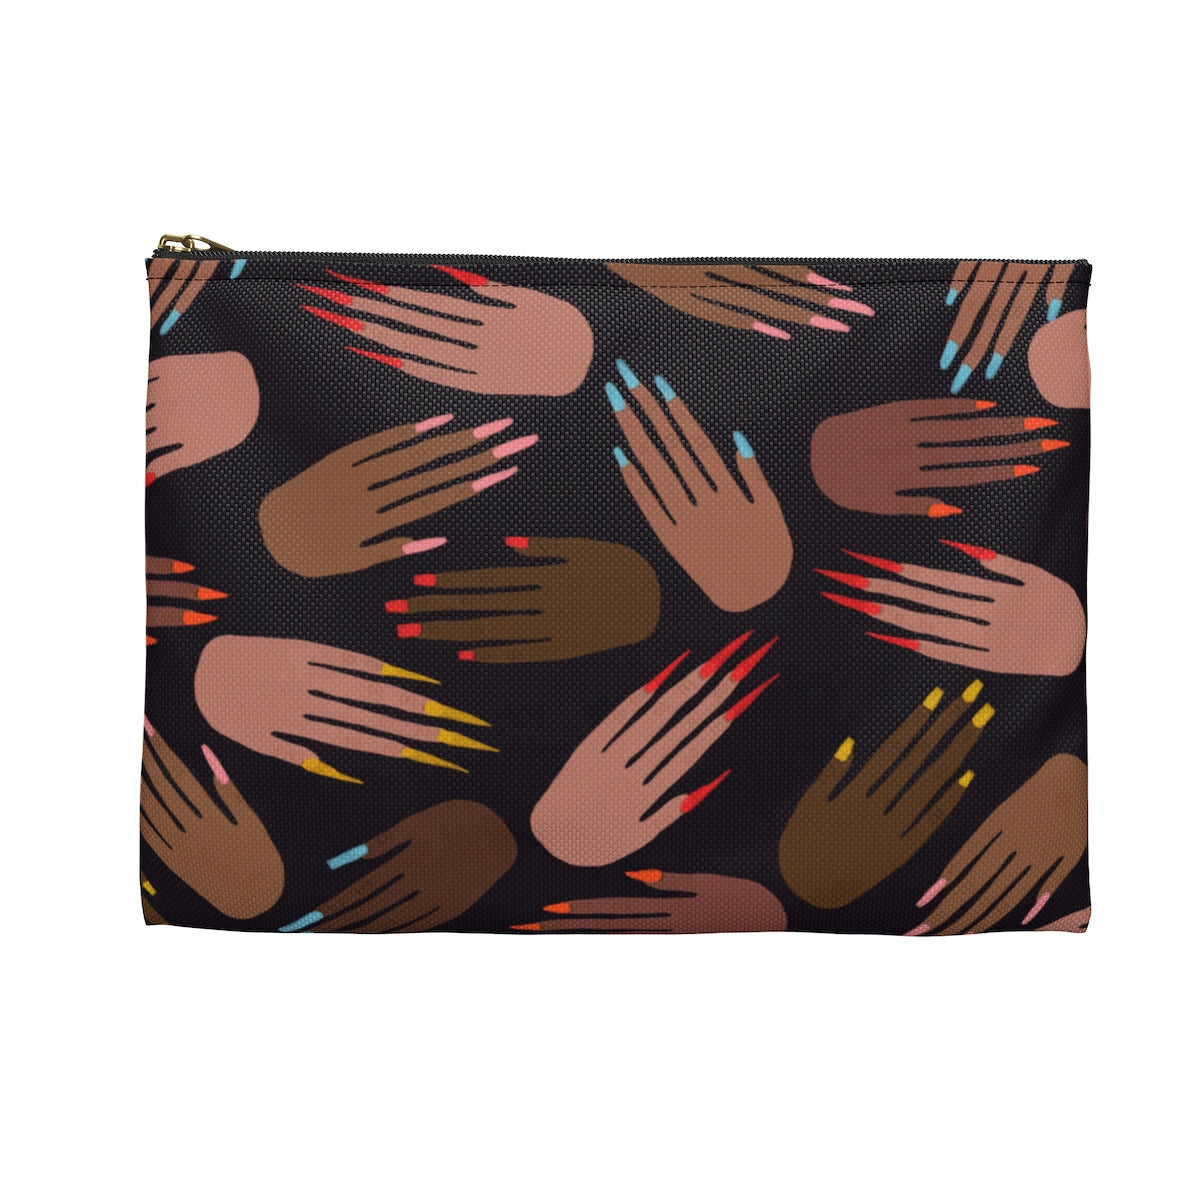 Pro Nails Accessory Pouch